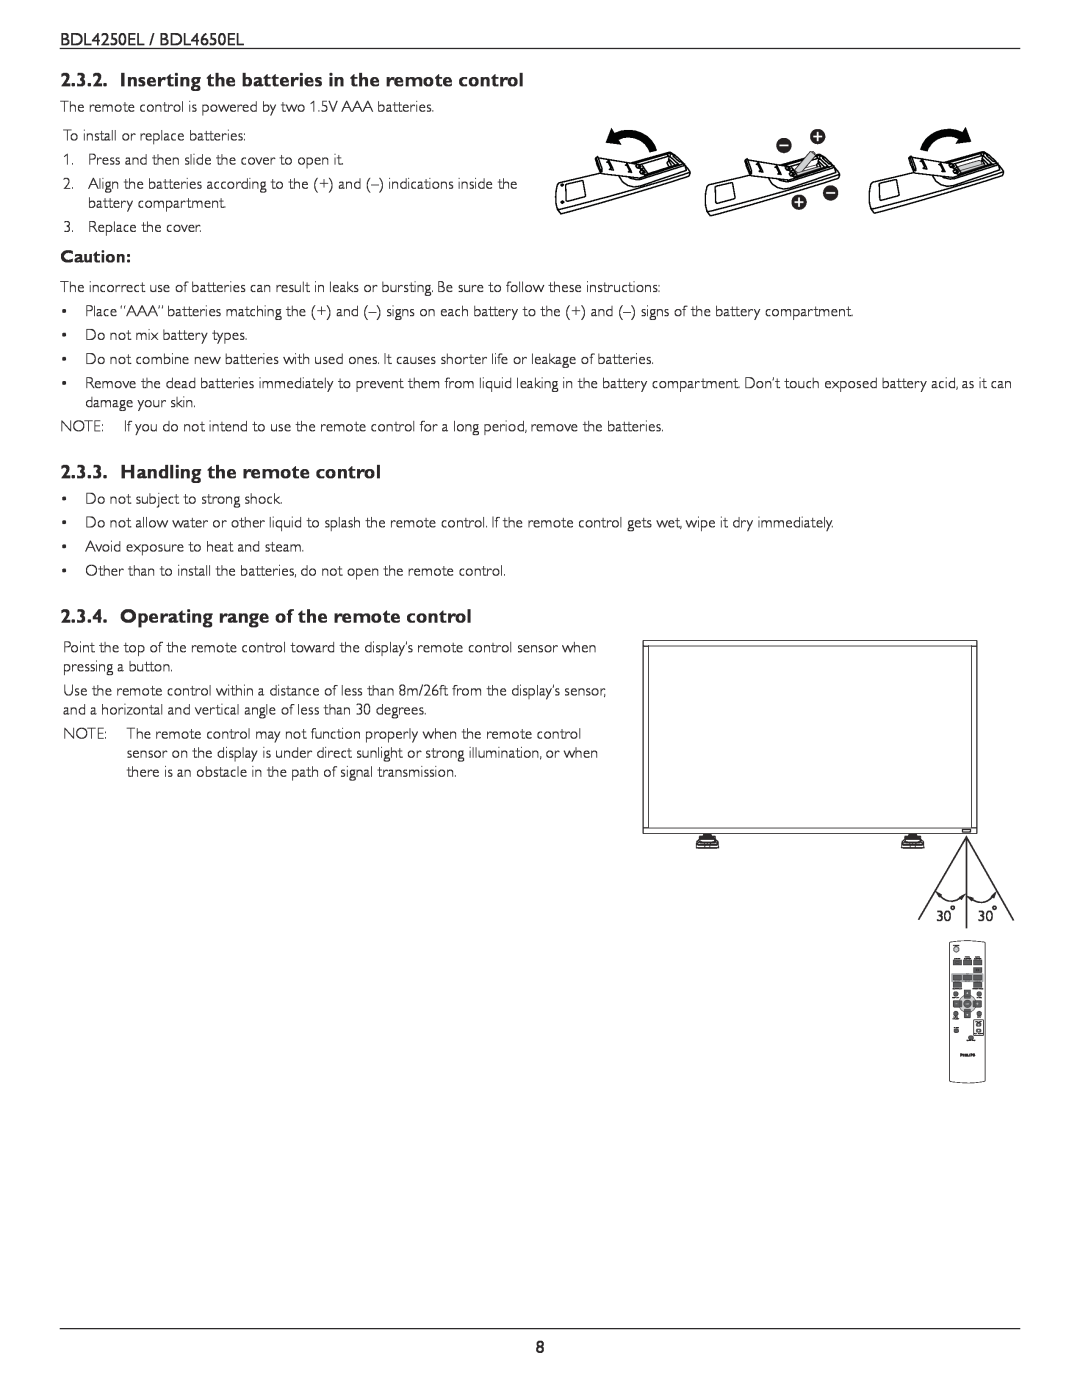 Philips BDL4650E, BDL4250EL user manual Inserting the batteries in the remote control, Handling the remote control 